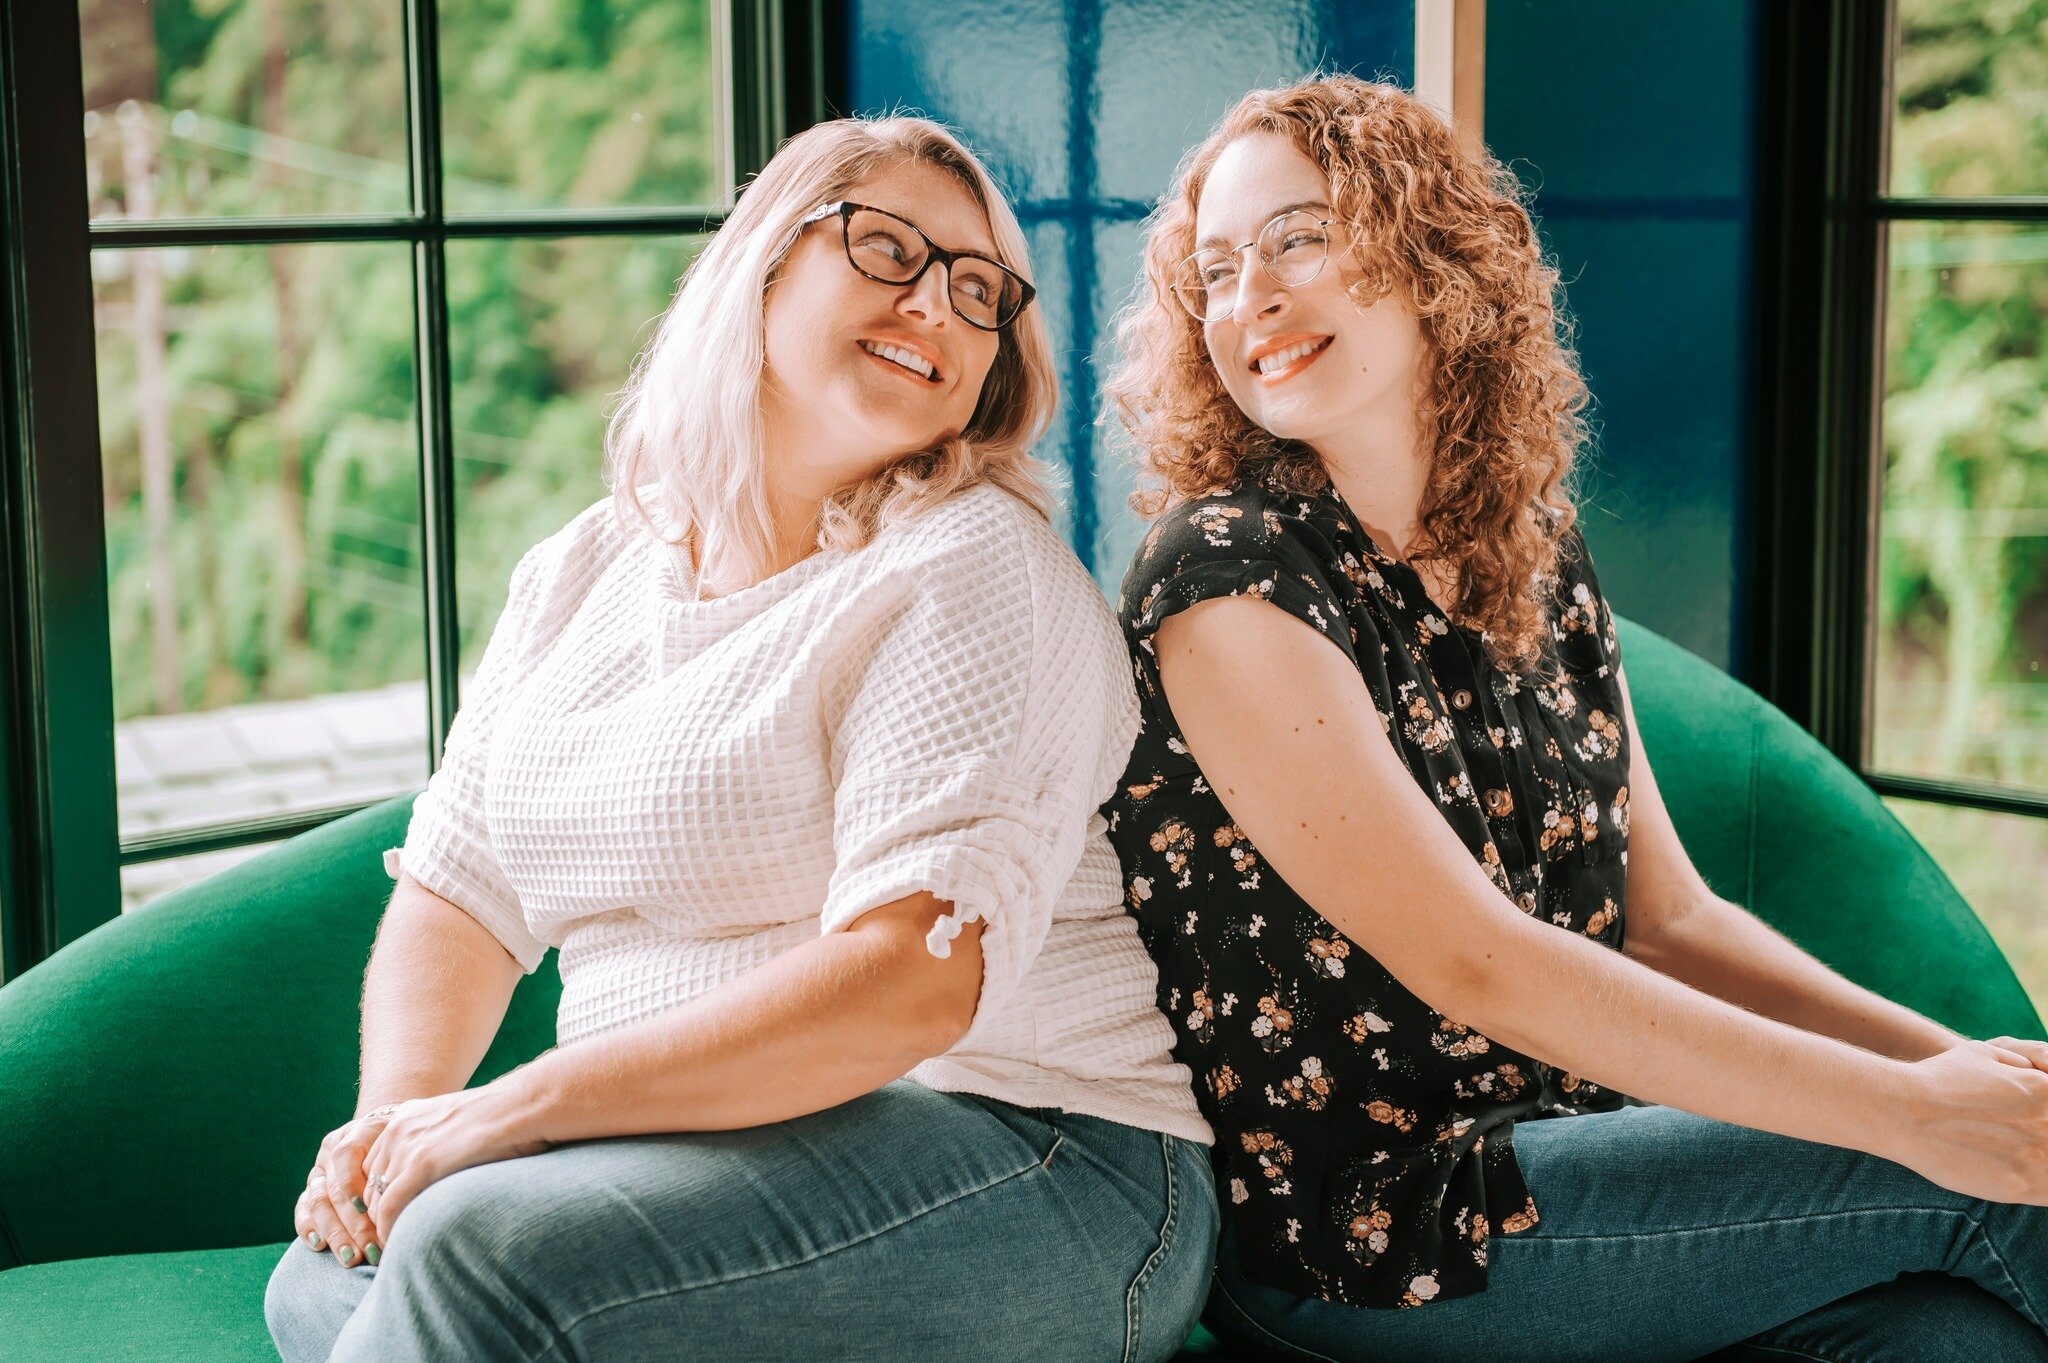 Happy Galentine's Day! 💟 Let's celebrate our female friendships by tagging our gal pals in the comments to spread the love today! 👯&zwj;♀️💜

#happygalentinesday #galentinesday #ocsocial #womenfriendships #femalefriendships #celebratefriendship #ga